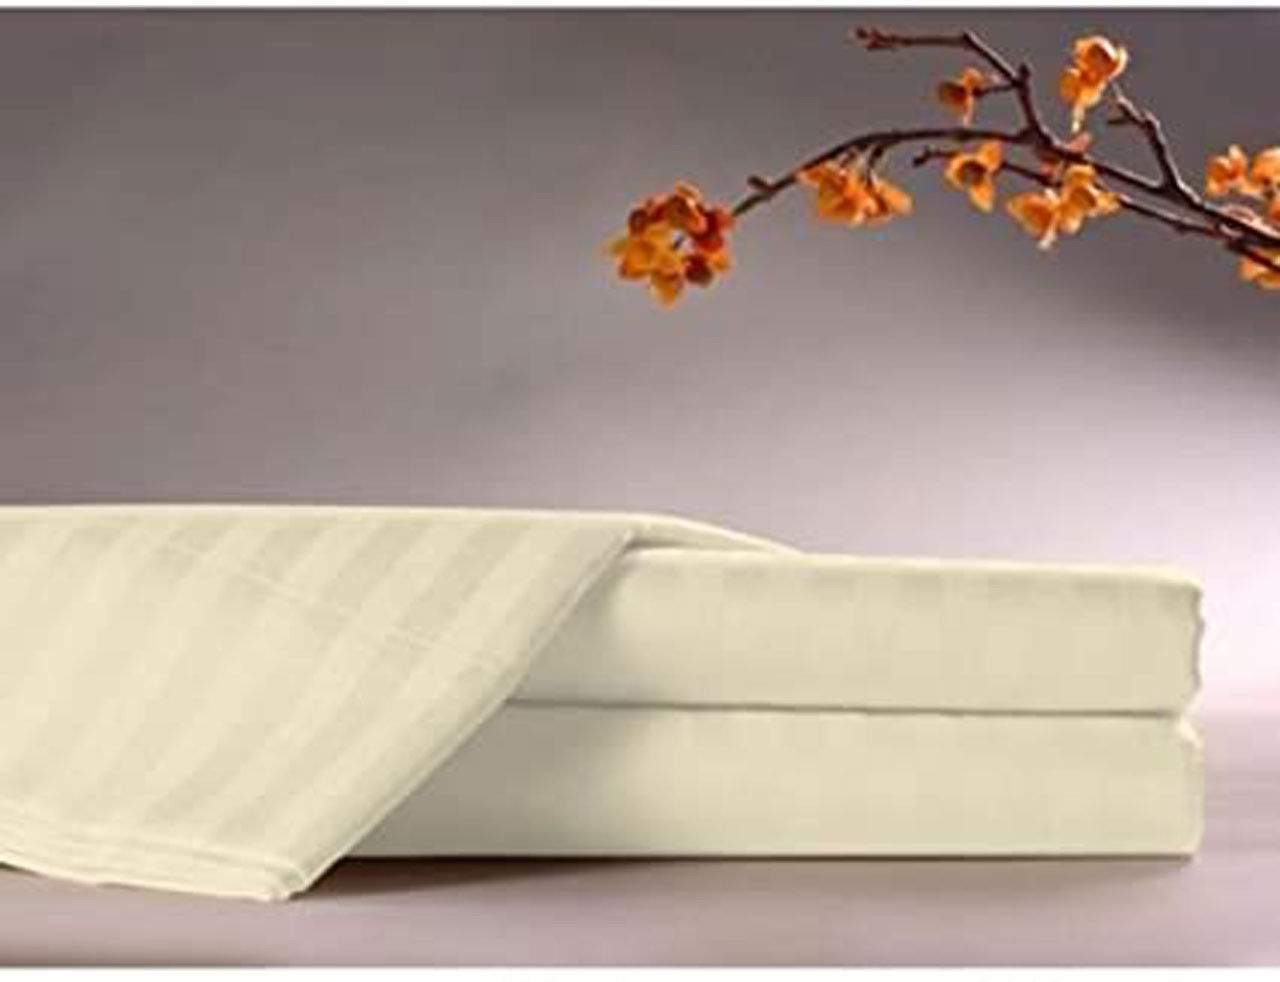 What are the specifications of Standard Textile's ComforTwill Tone-on-Tone Bone Sheets?